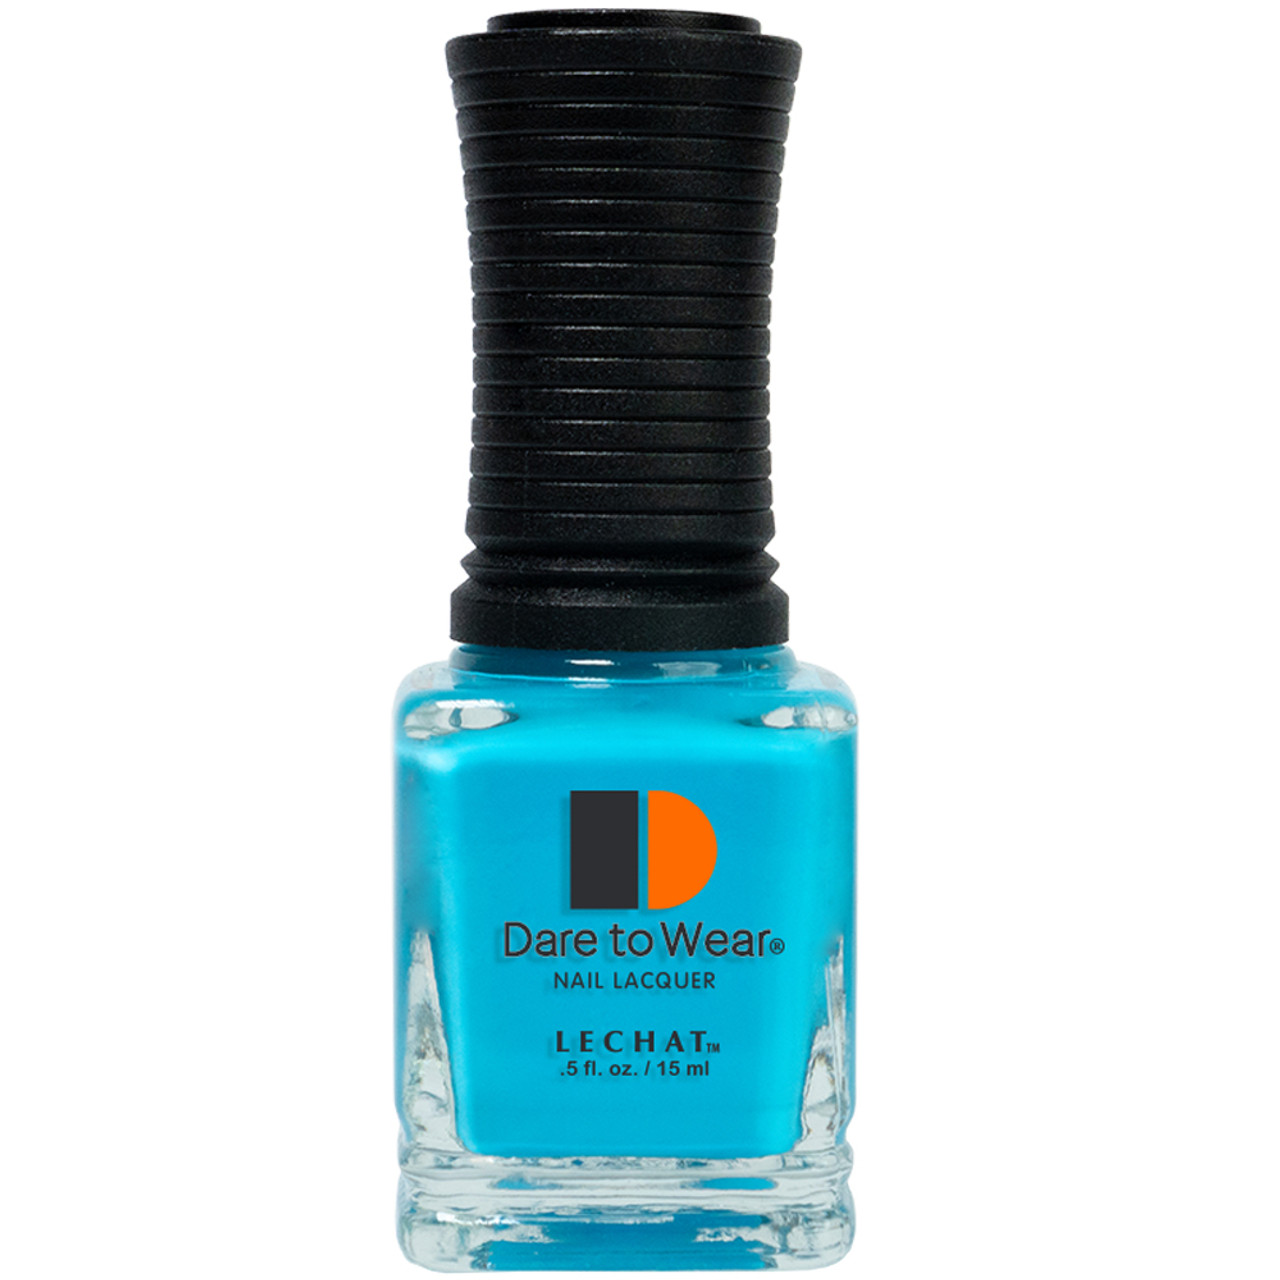 LeChat Dare To Wear Nail Lacquer Summer Splash - .5 oz